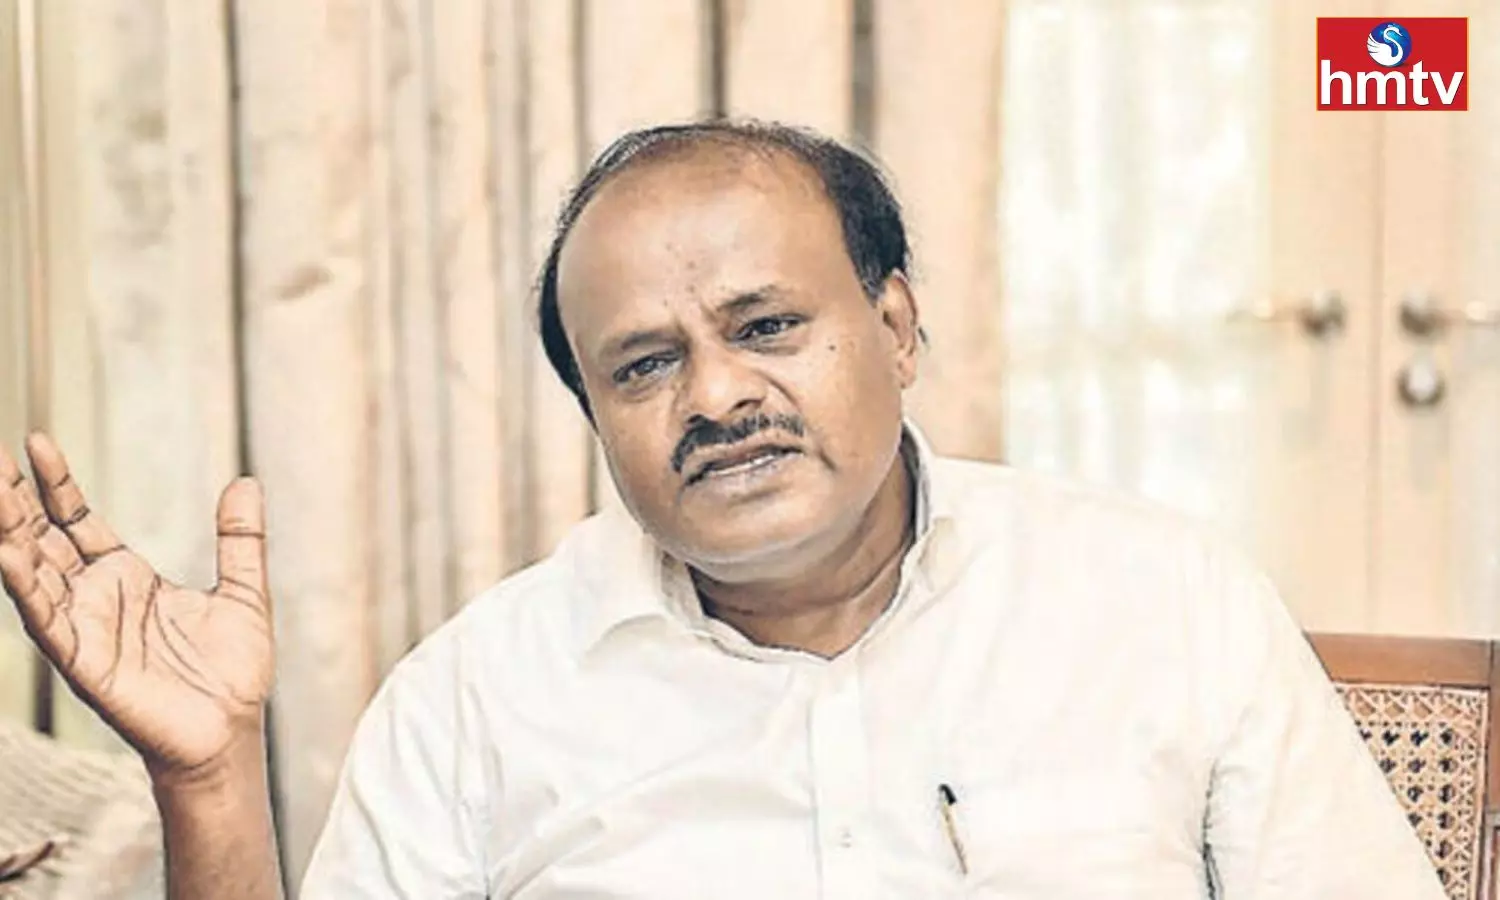 JDS Chief Kumaraswamy Receives a Backlash From People